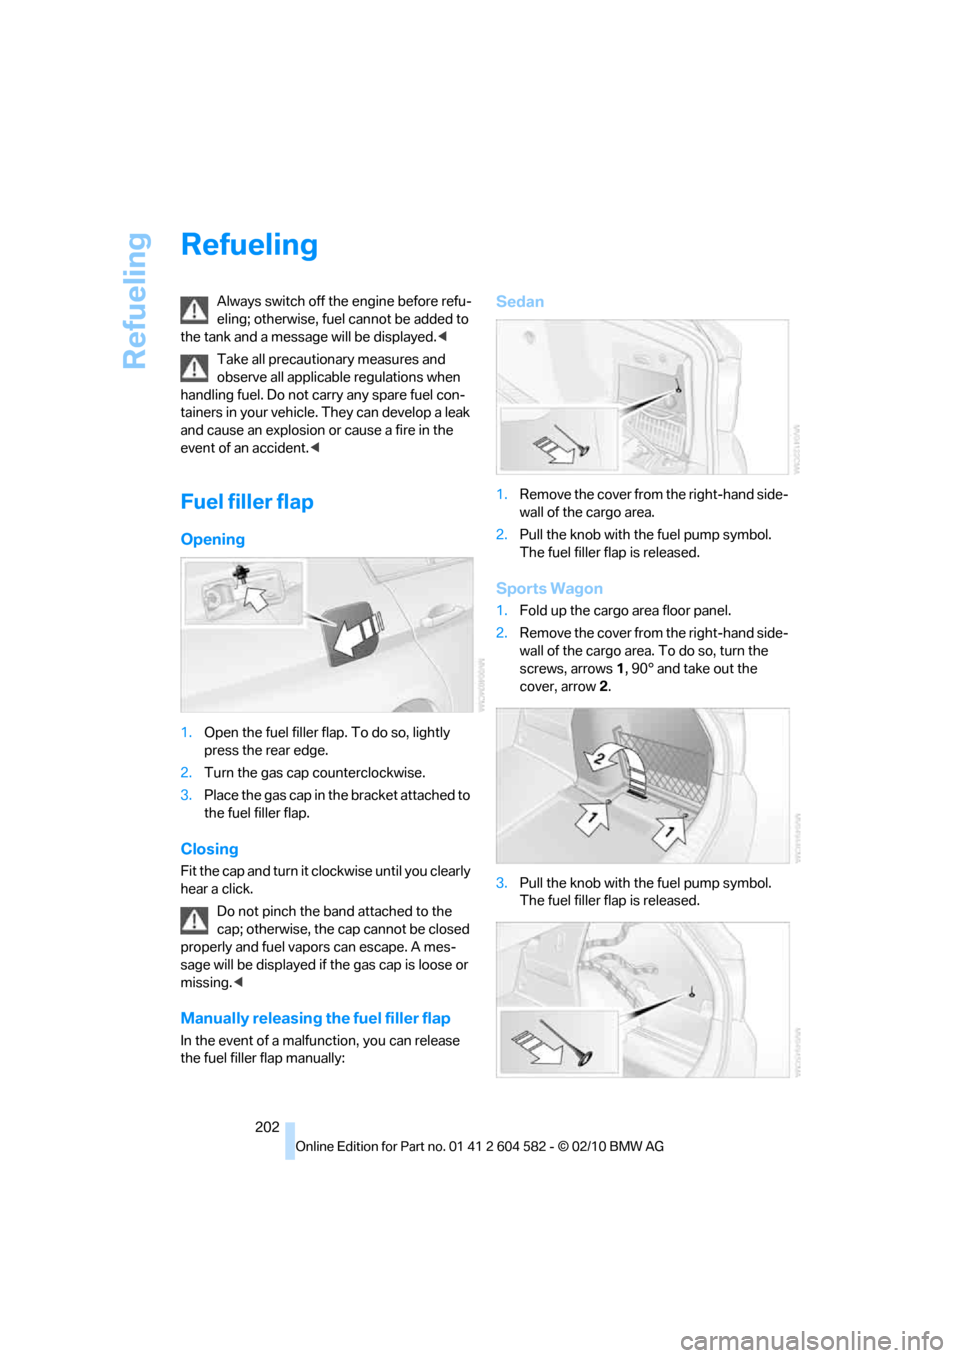 BMW 323I TOURING 2011 E91 Owners Manual Refueling
202
Refueling
Always switch off the engine before refu-
eling; otherwise, fuel cannot be added to 
the tank and a message will be displayed.<
Take all precautionary measures and 
observe all